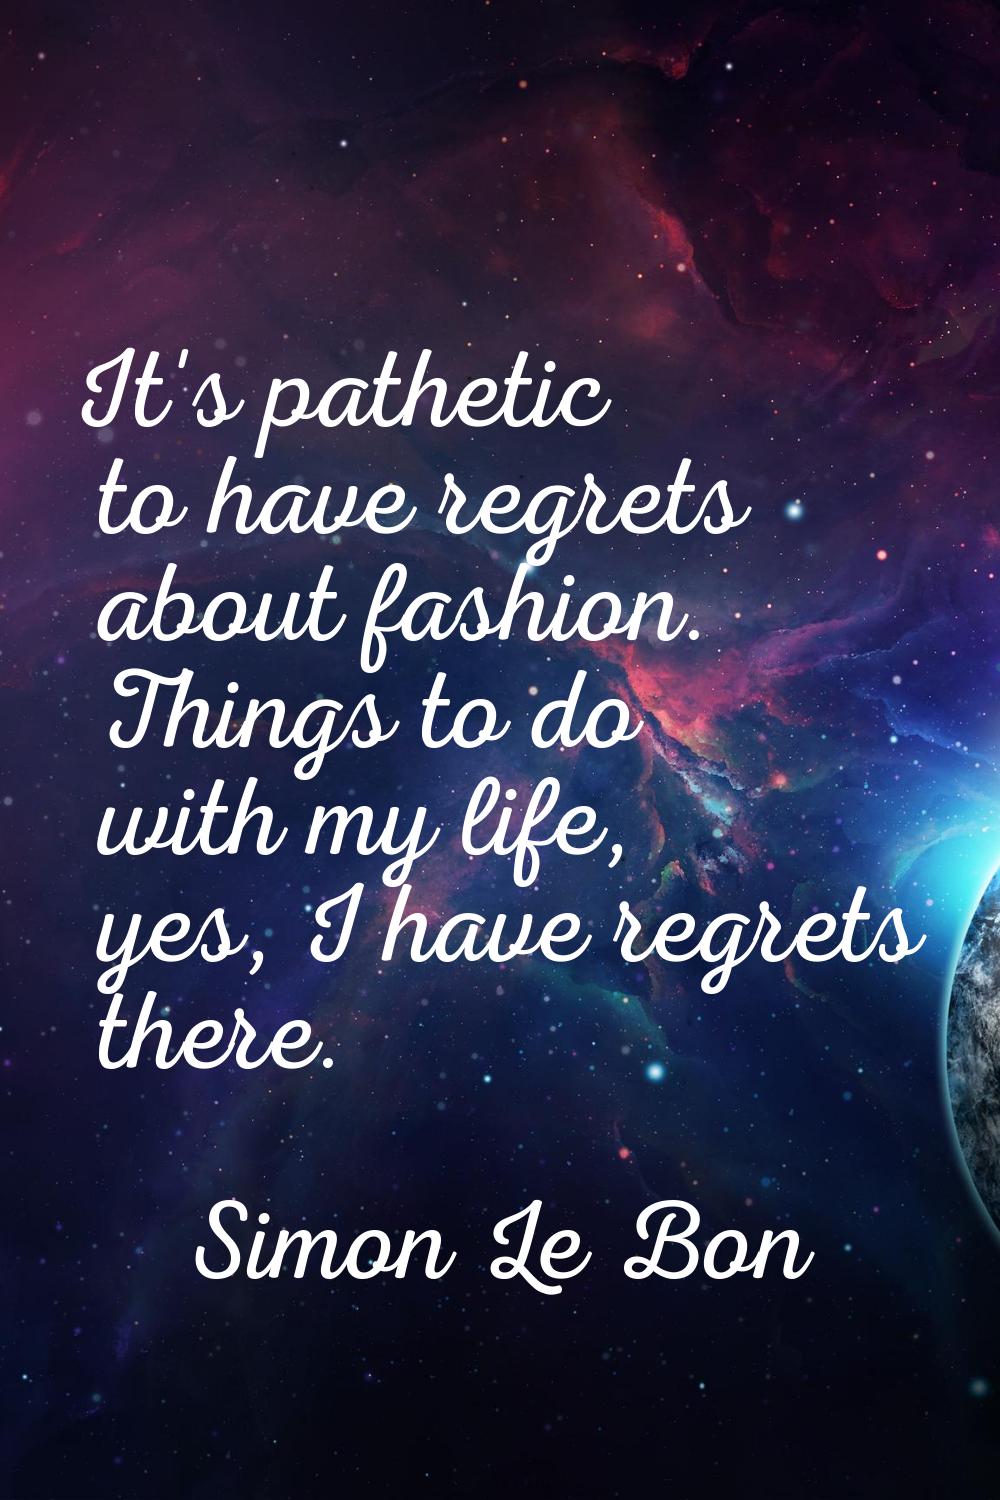 It's pathetic to have regrets about fashion. Things to do with my life, yes, I have regrets there.